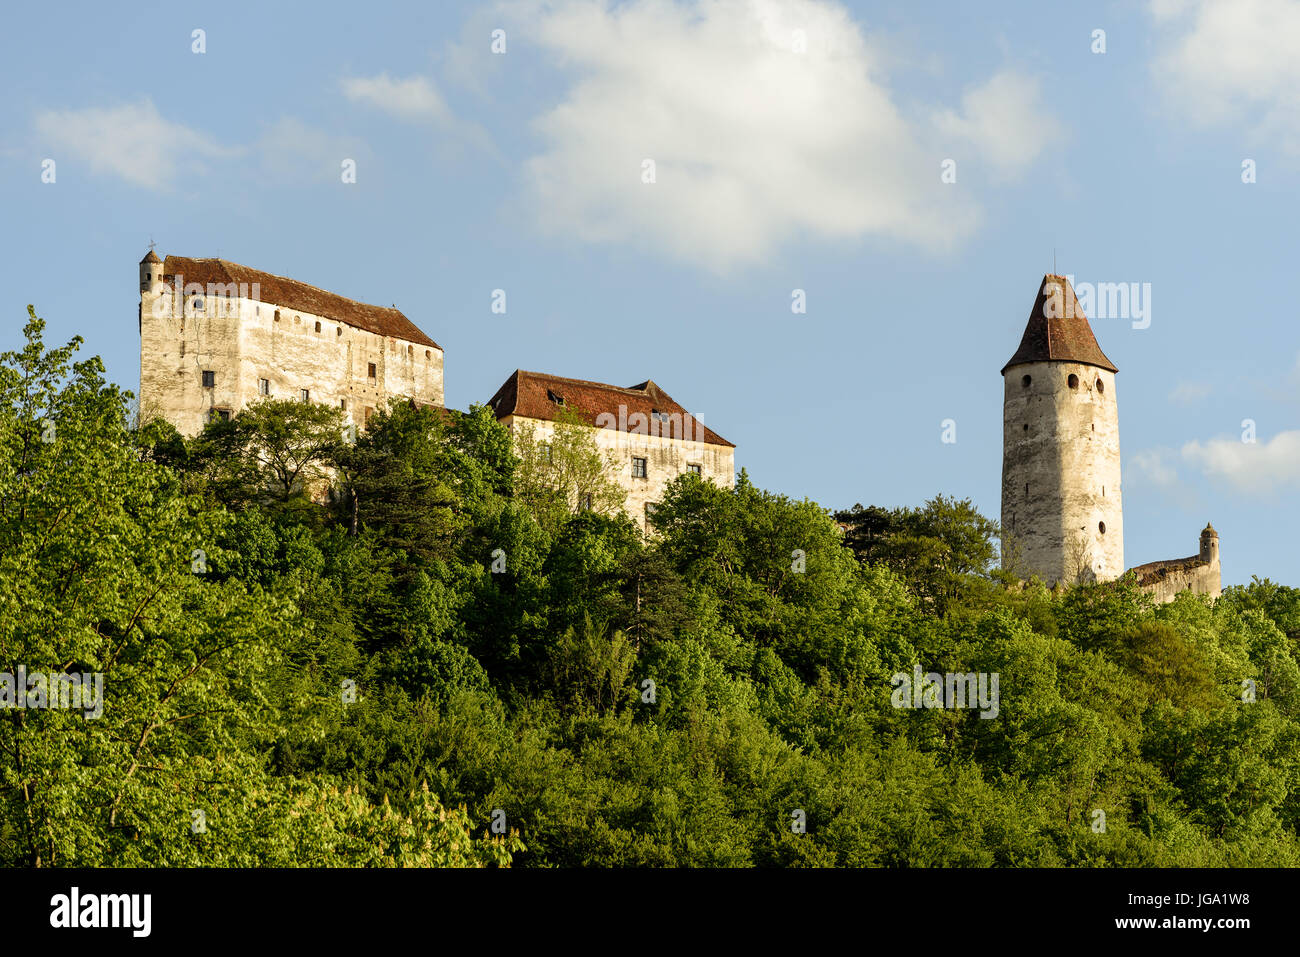 Outdoor scenic color photography of the medieval castle Seebenstein, Austria, located on a hill with a green forest taken on a sunny spring day Stock Photo